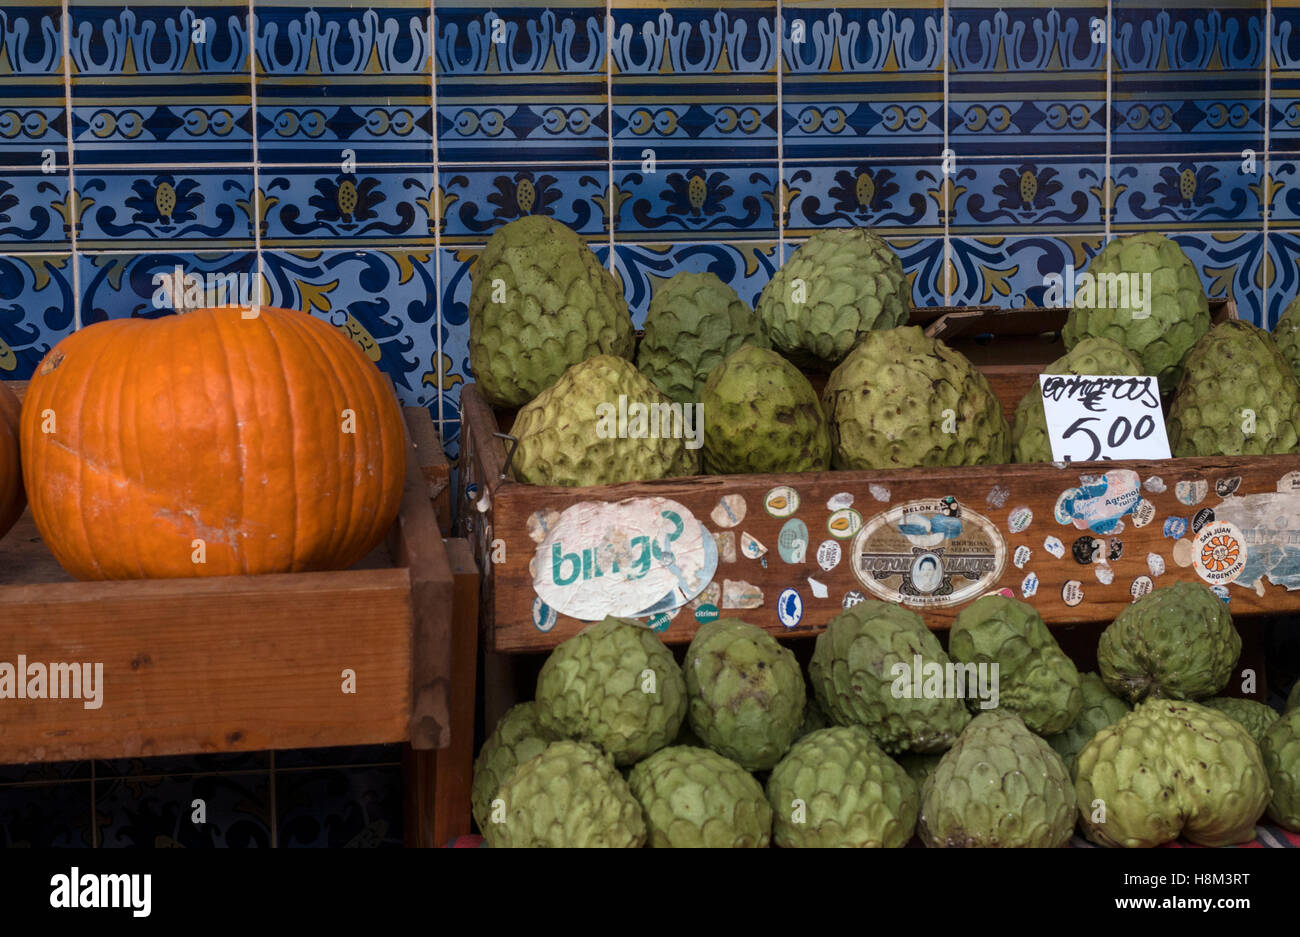 Cherimoya (right), or custard apple, with a pumpkin at the Workers' Market, Mercado dos Lavradores, Funchal, Madeira, Portugal Stock Photo